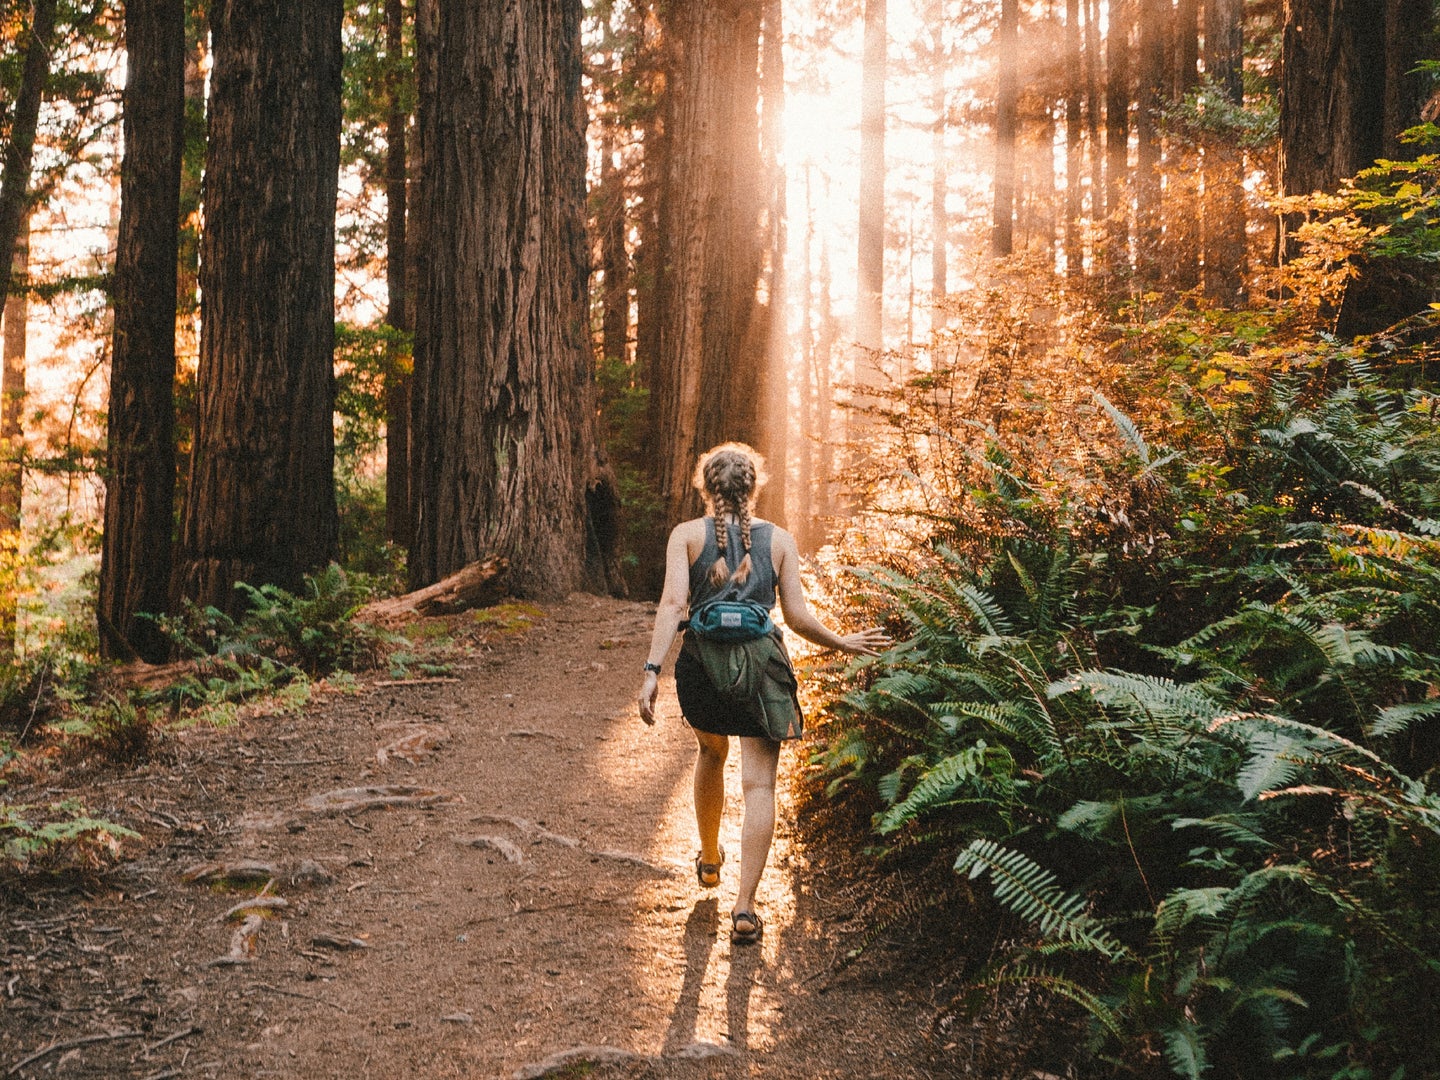 A person hiking alone on a trail without any crowds, moving through the forest toward the setting sun.